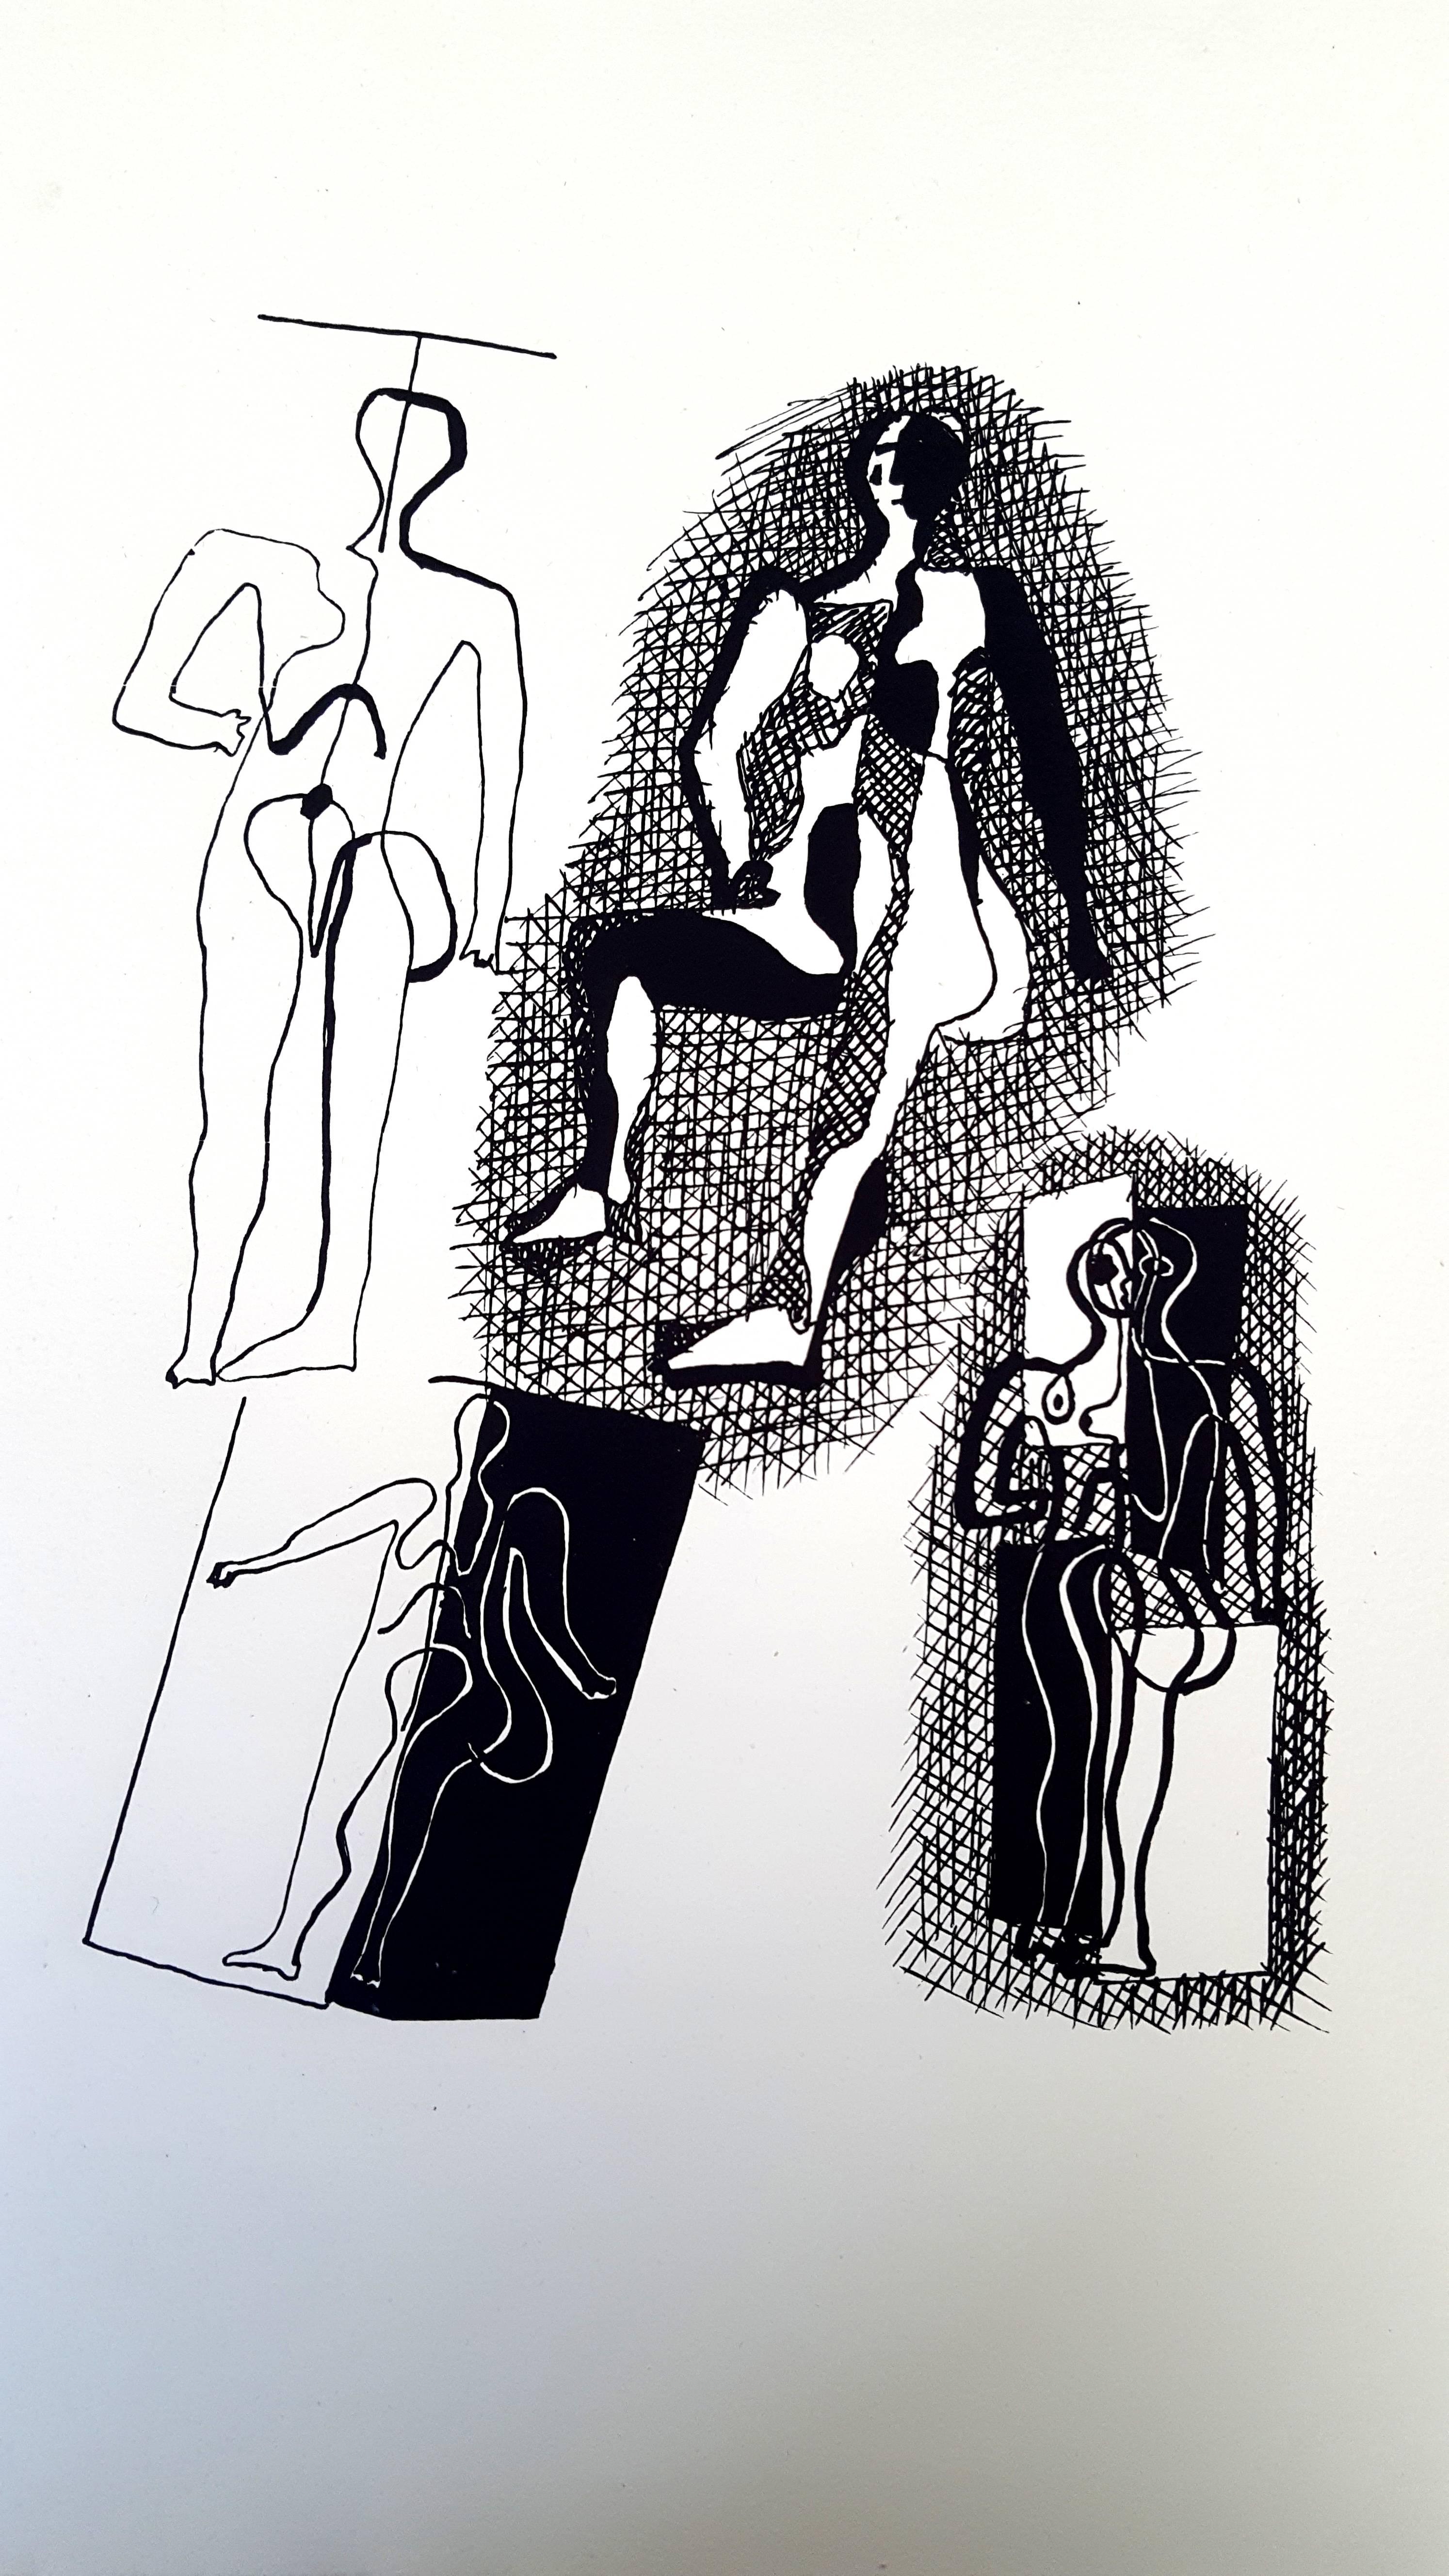 (after) Pablo Picasso Figurative Print - Pablo Picasso (after) Helene Chez Archimede - Wood Engraving